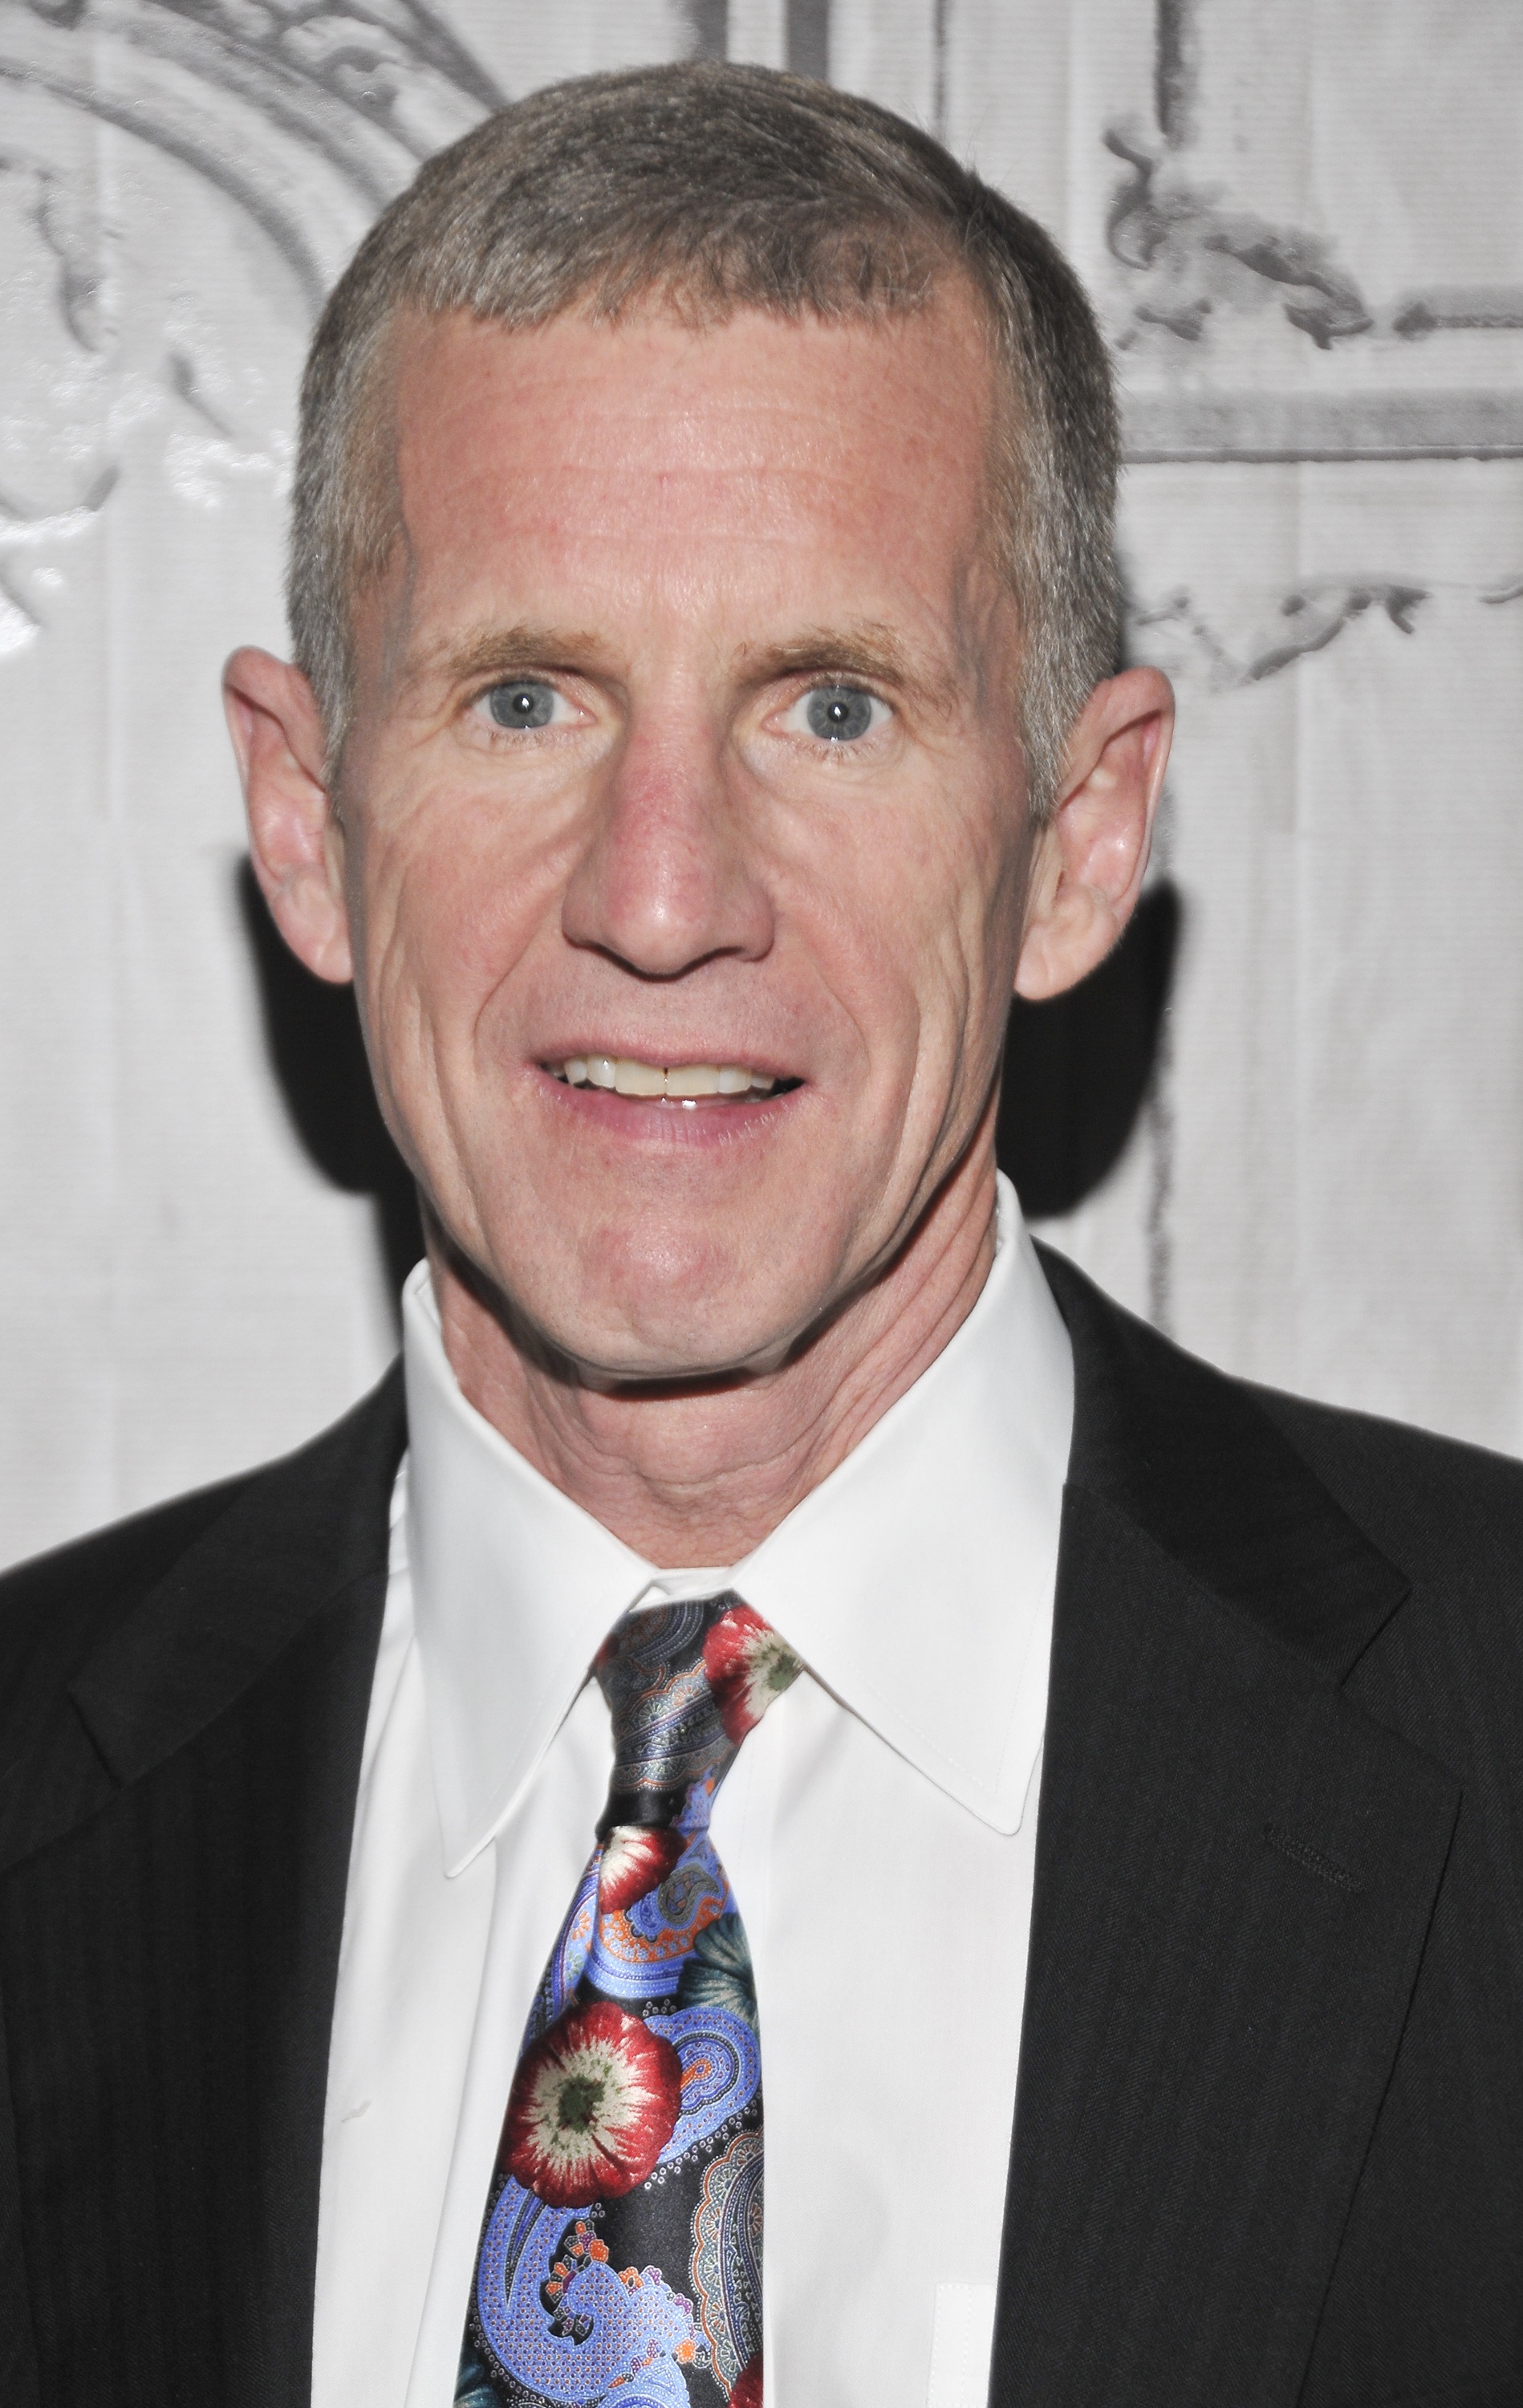 General Stanley McChrystal attends AOL Build Speaker Series at AOL Studios in New York on May 14, 2015. (Jenny Anderson—WireImage)